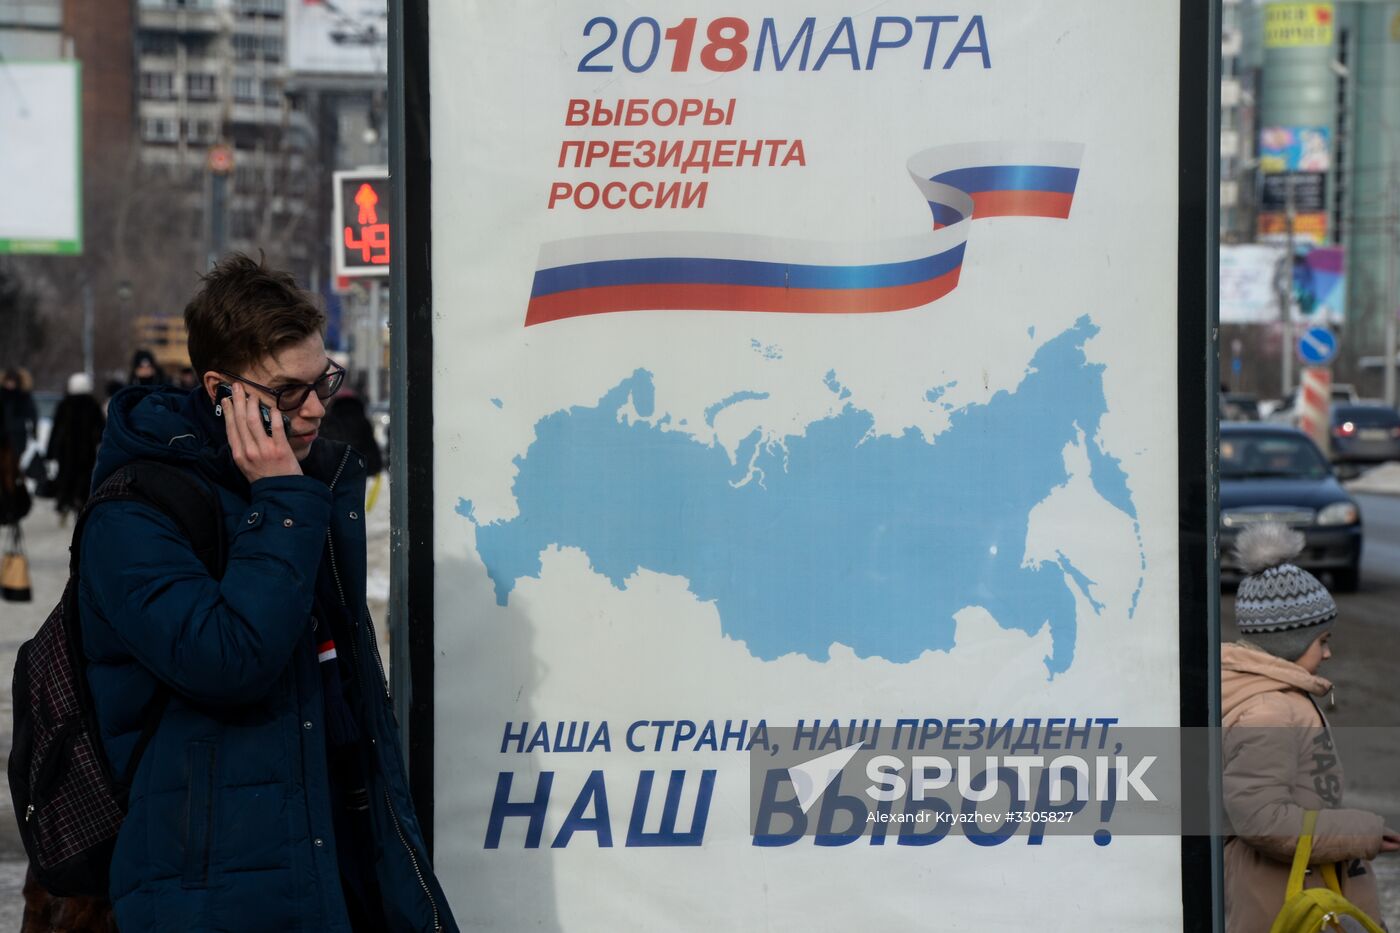 Election campaign posters in Novosibirsk